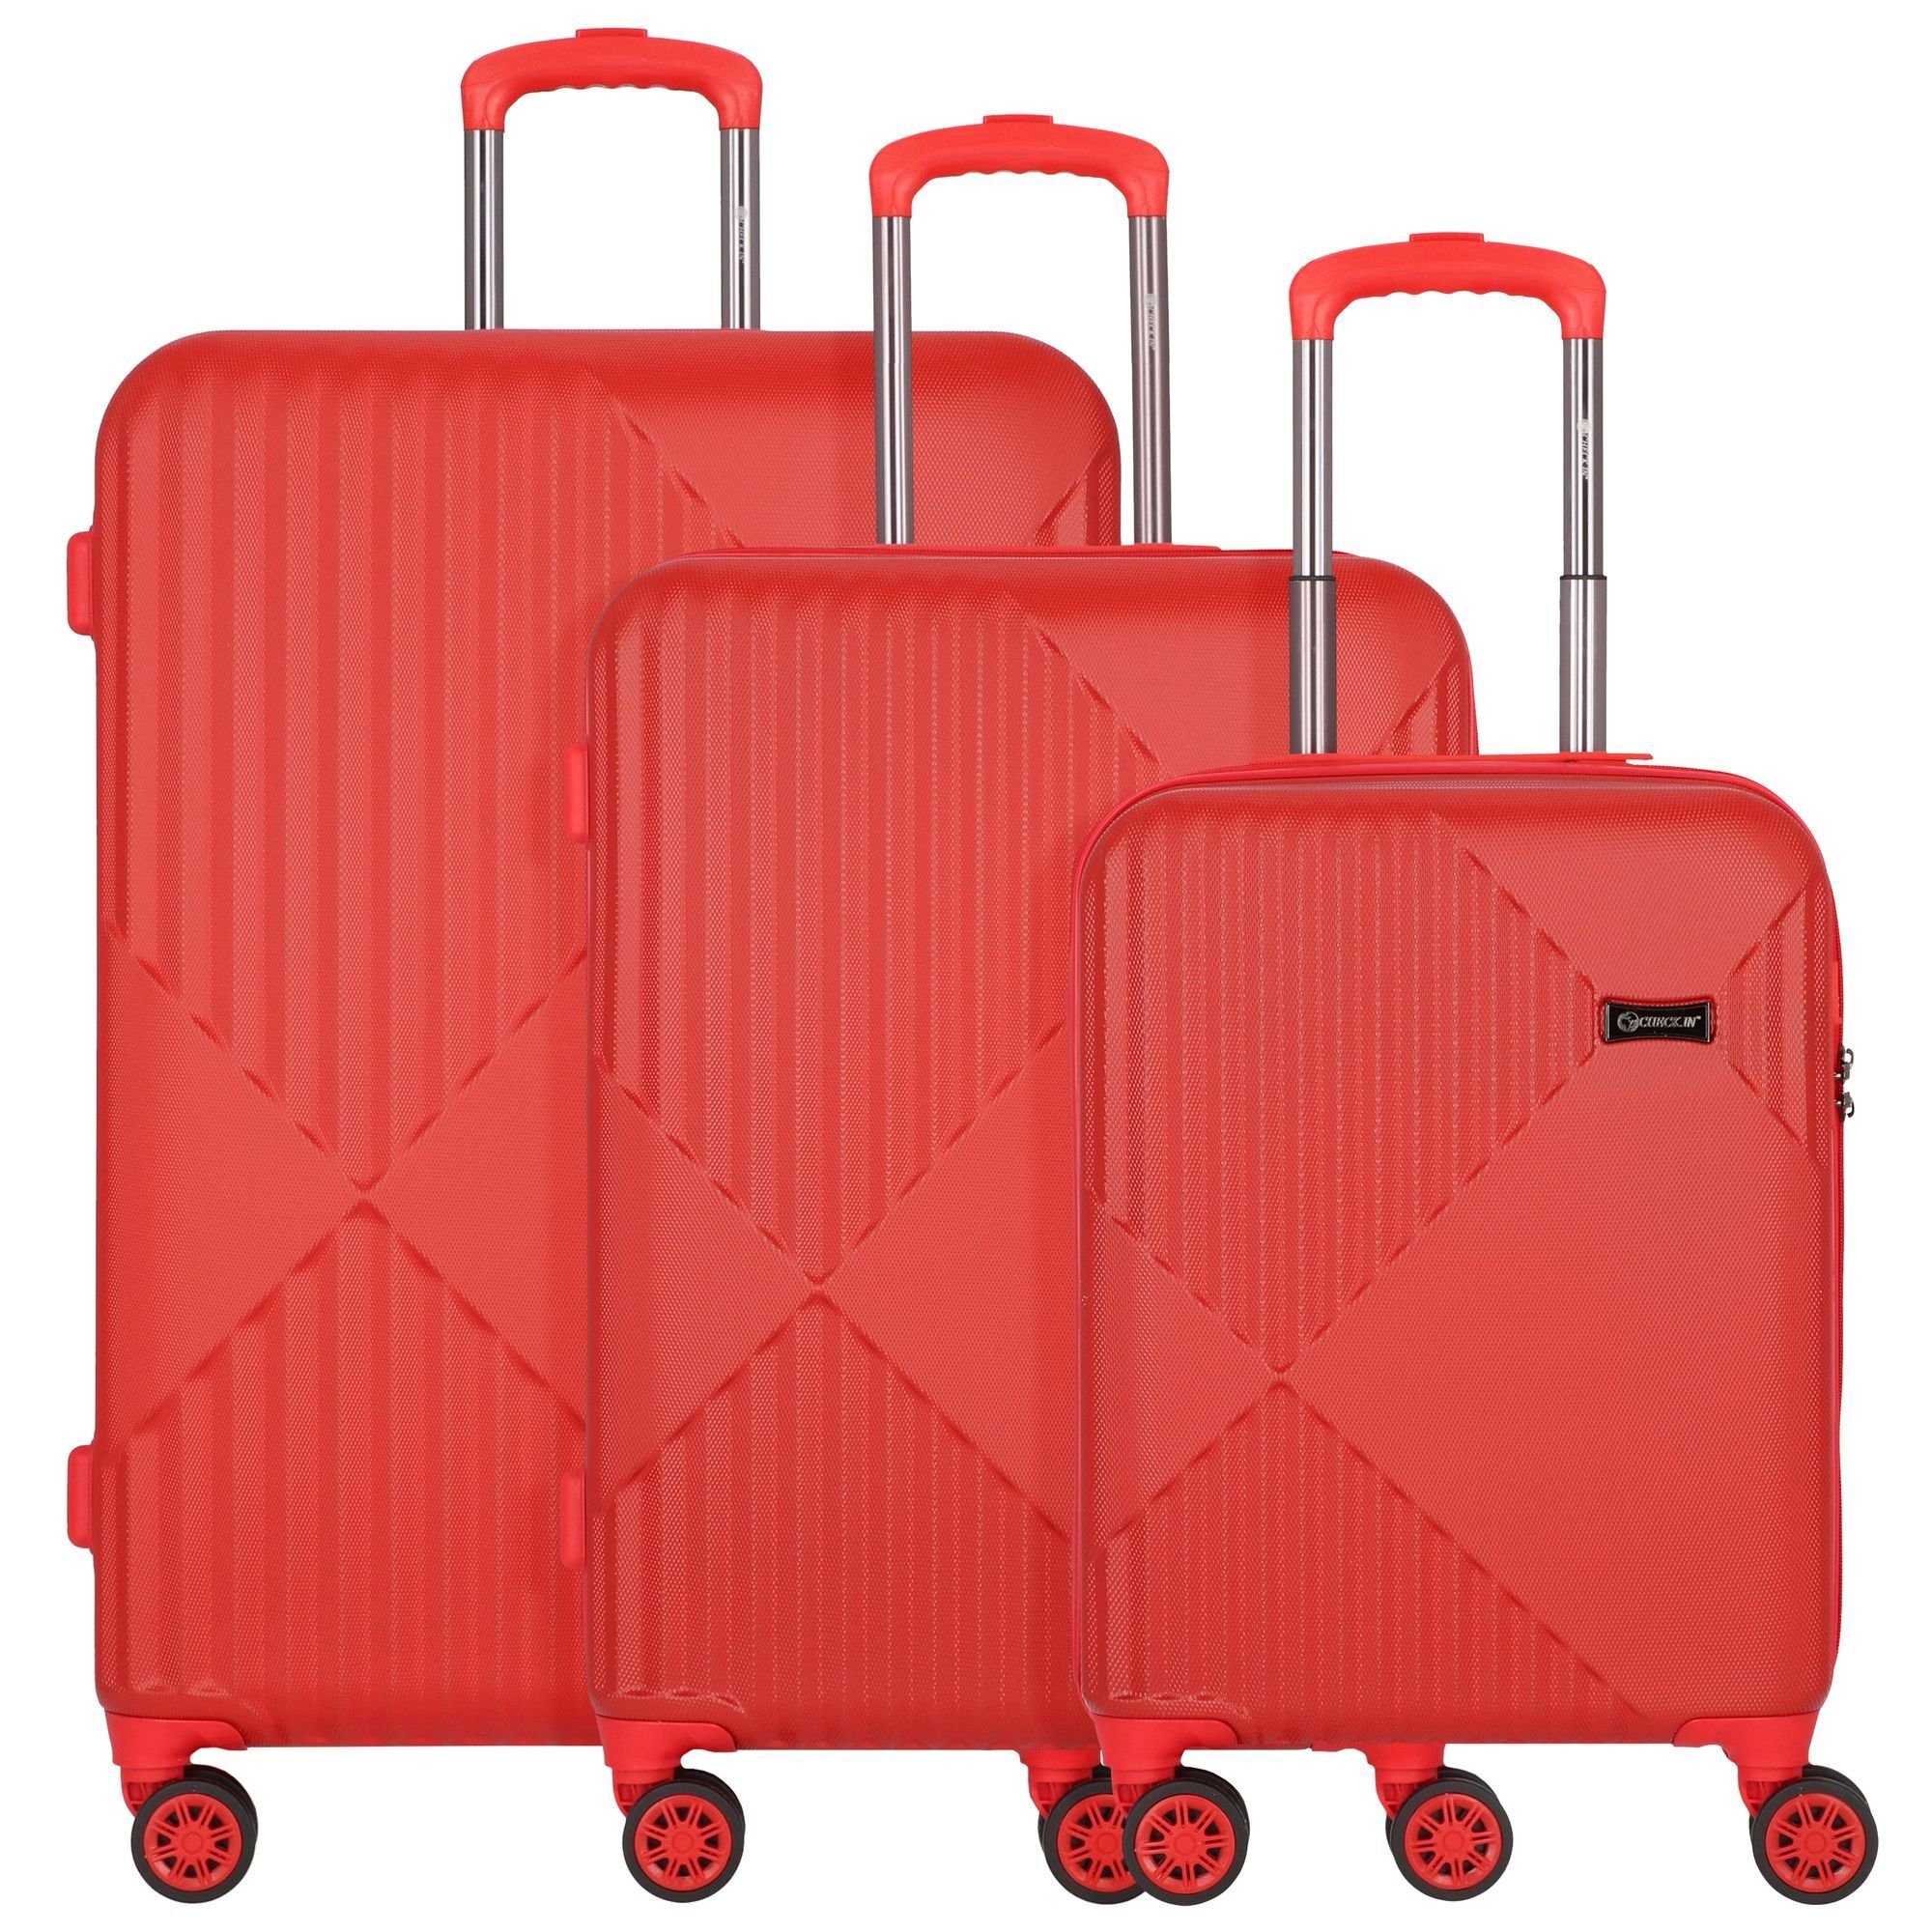 CHECK.IN® Trolleyset Liverpool, 4 rot ABS 3 tlg), Rollen, (3-teilig